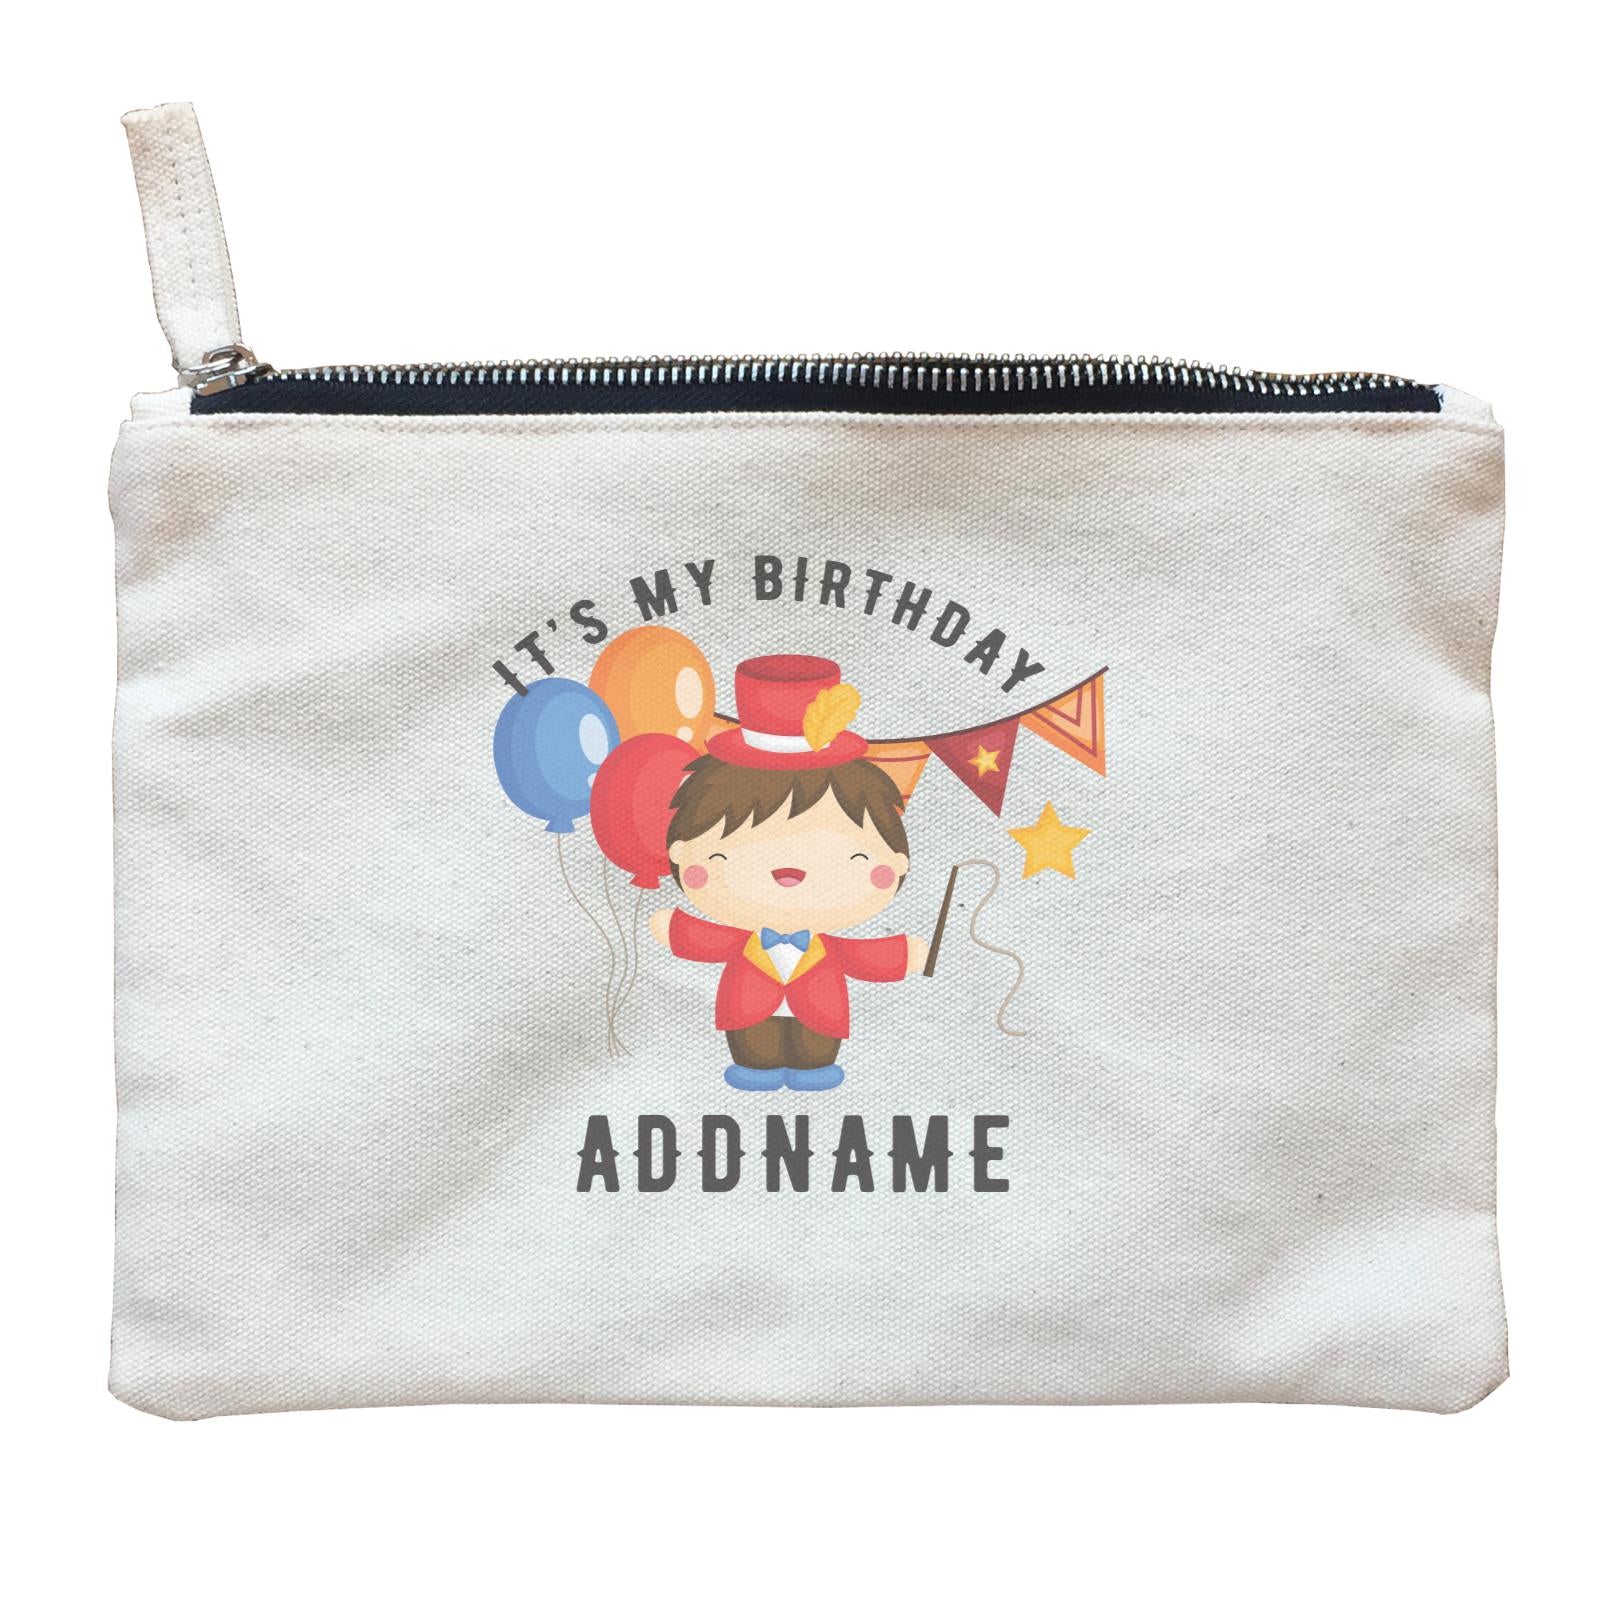 Birthday Circus Happy Boy Leader of Performance It's My Birthday Addname Zipper Pouch